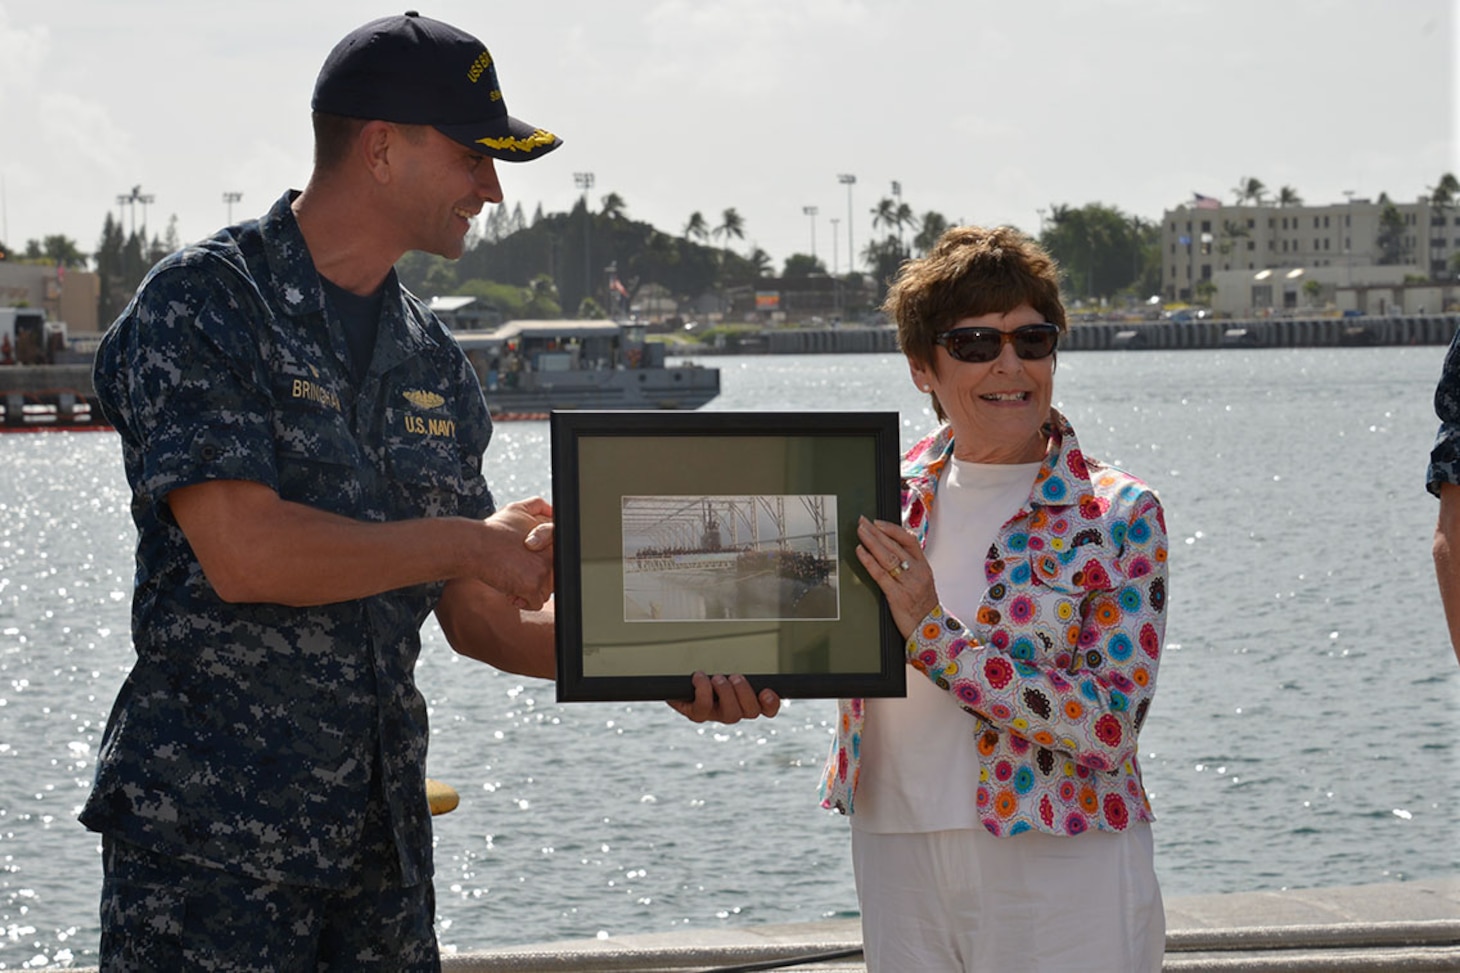 151109-N-EF781-047 PEARL HARBOR (NOV. 9, 2015) Cmdr. Wes Bringham presents a photograph of the USS Bremerton as a gift to the mayor of Bremerton, Wash., Patty Lent.  Bringham told Mayor Lent he appreciates all the support his crew receives from the city of Bremerton and the Navy League chapter located there. (U.S. Navy photo by Lieutenant Brett Zimmerman/Released)